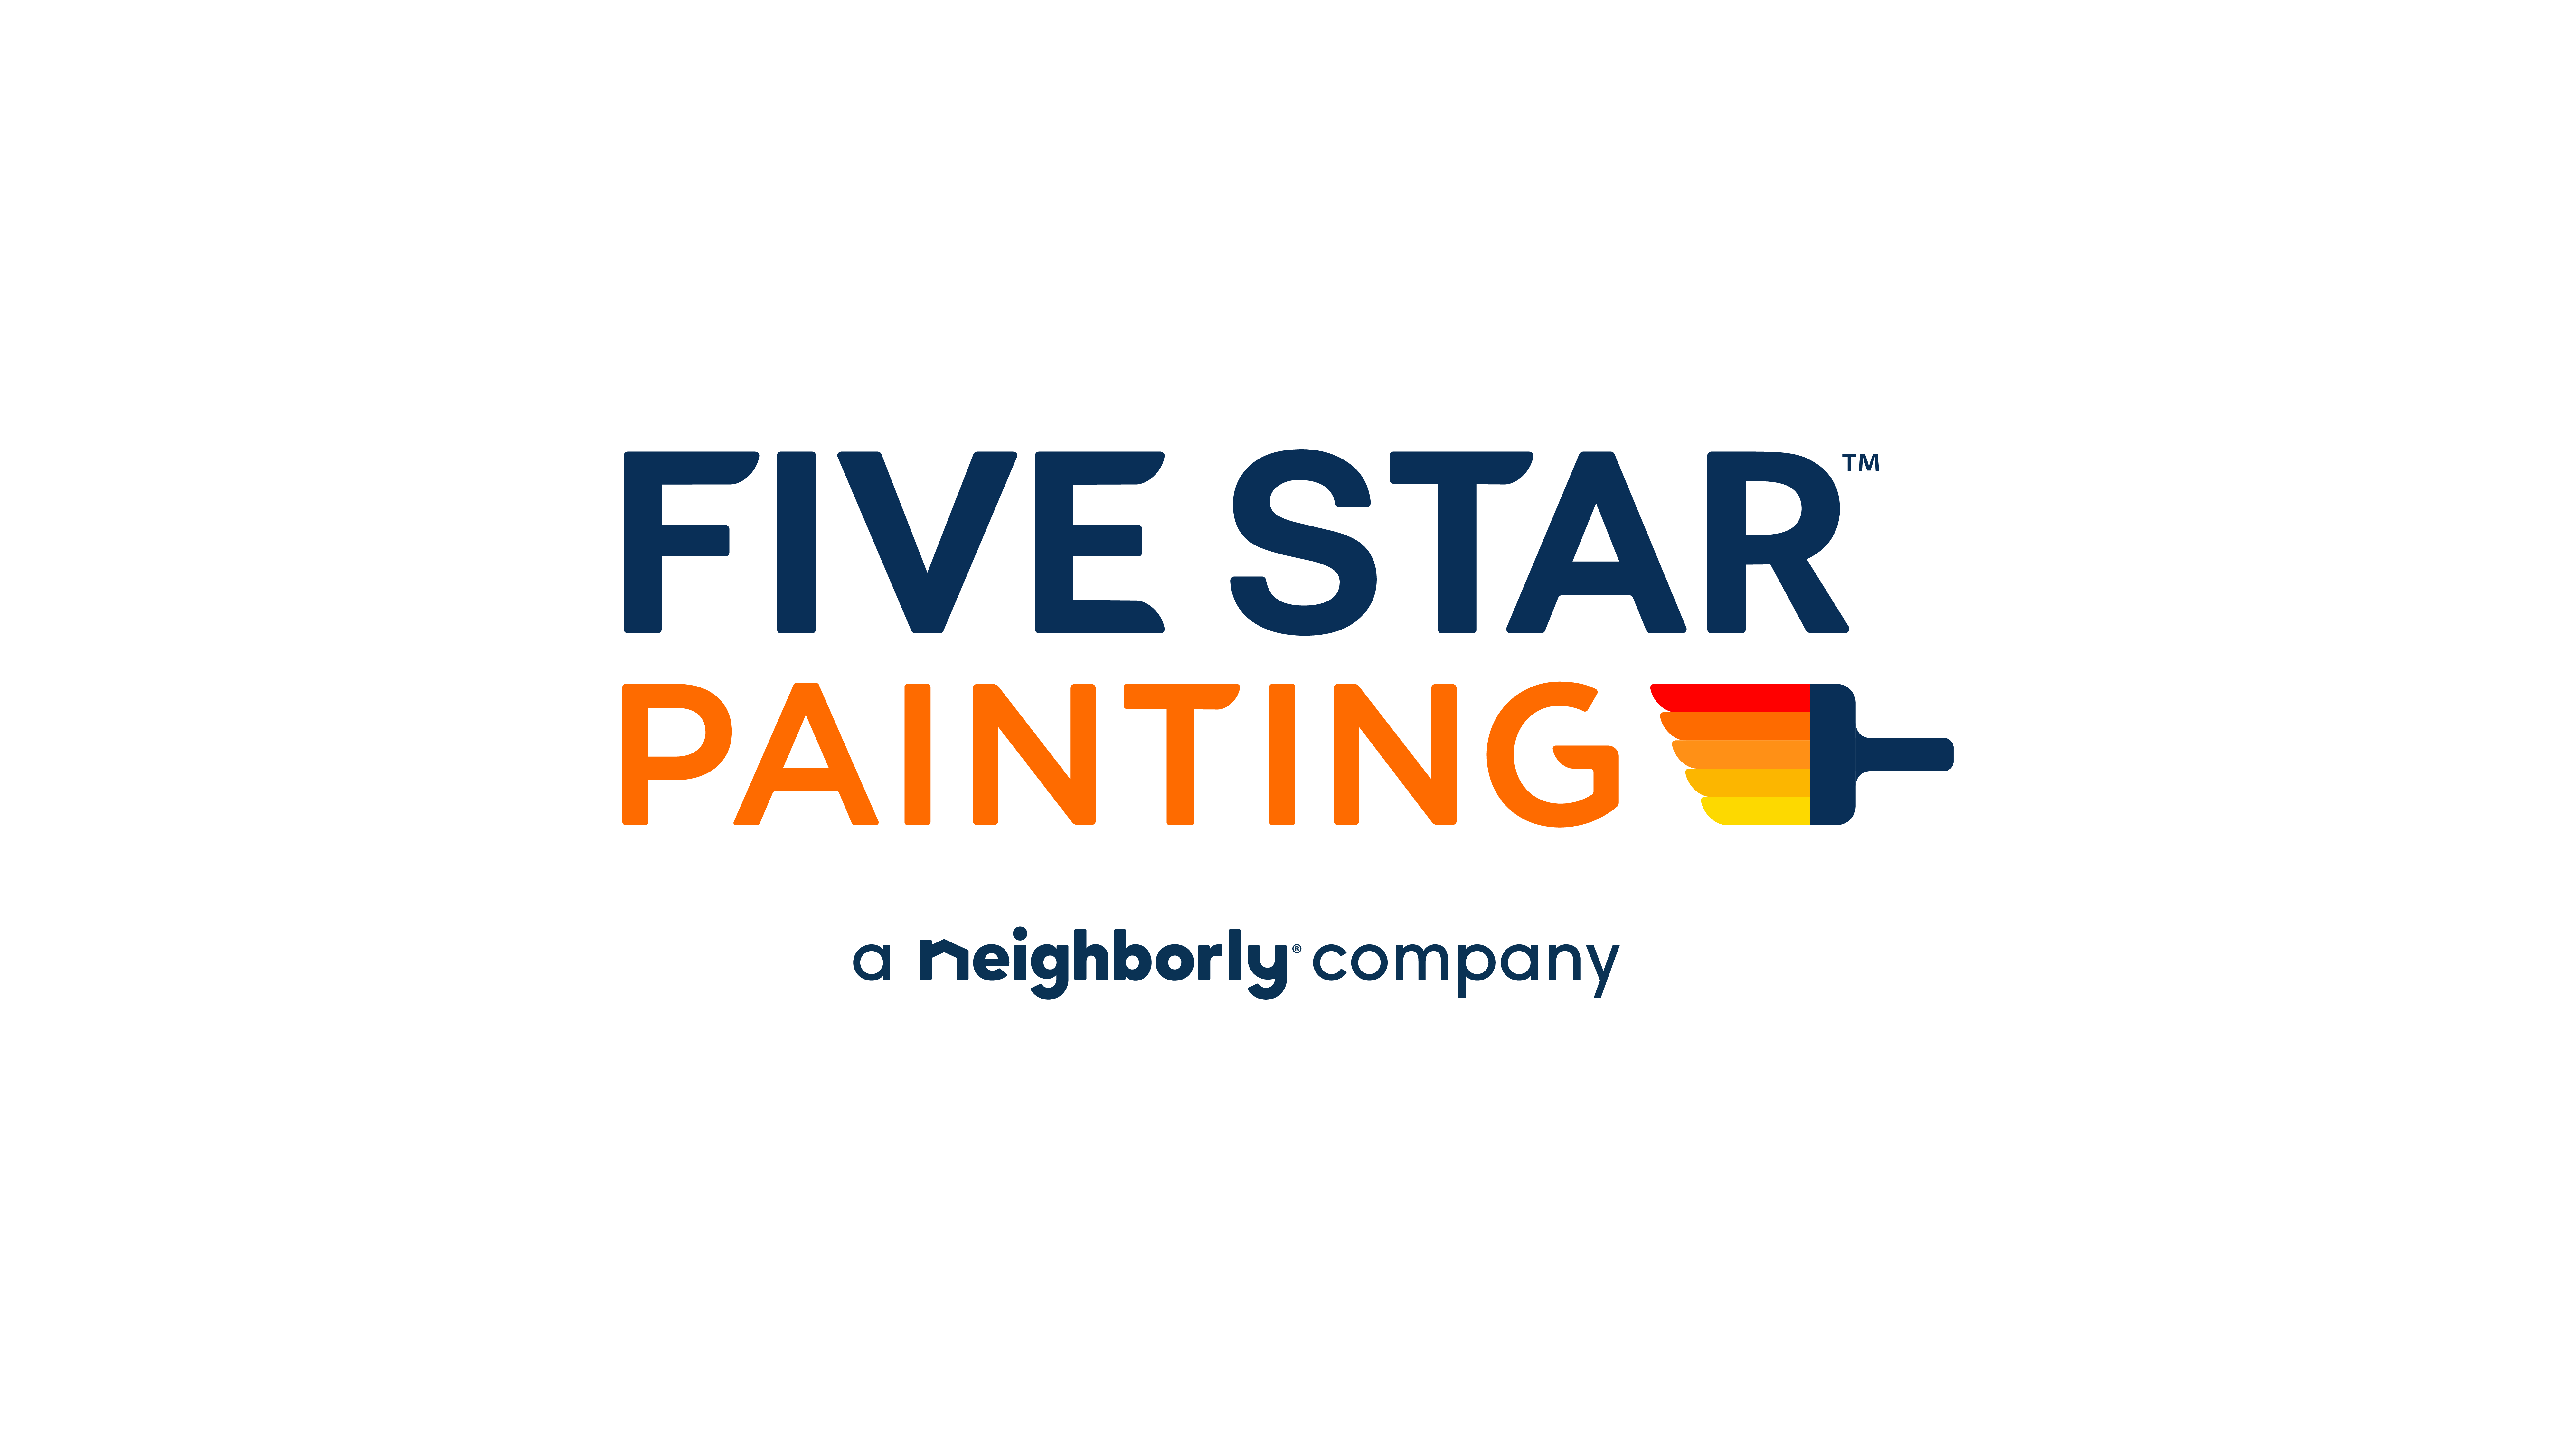 Five Star Painting of Edmonton NW - Edmonton, AB T5Y 2T7 - (587)802-1835 | ShowMeLocal.com